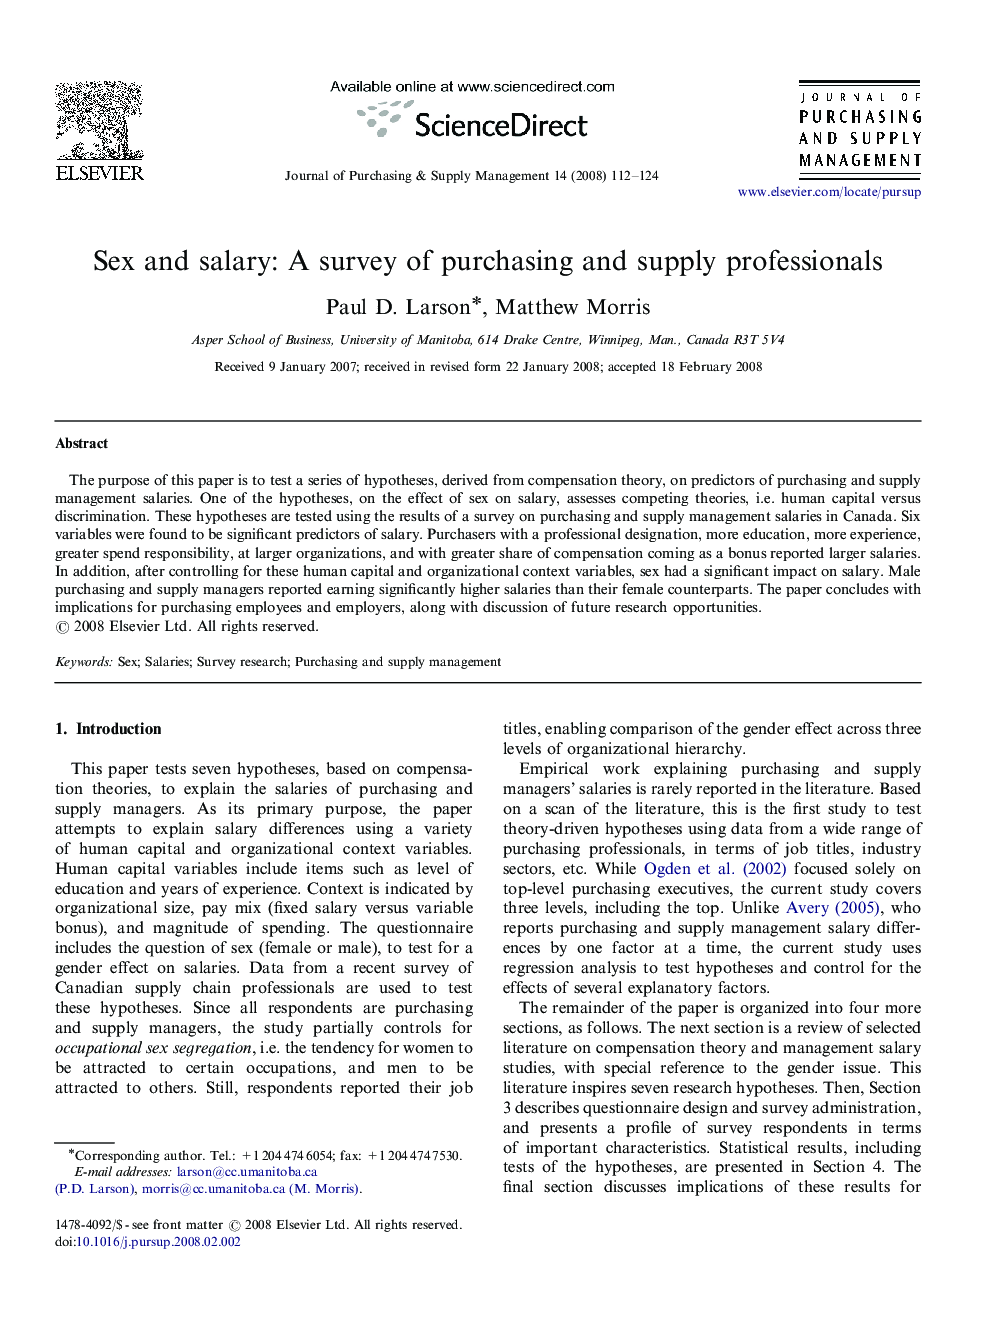 Sex and salary: A survey of purchasing and supply professionals